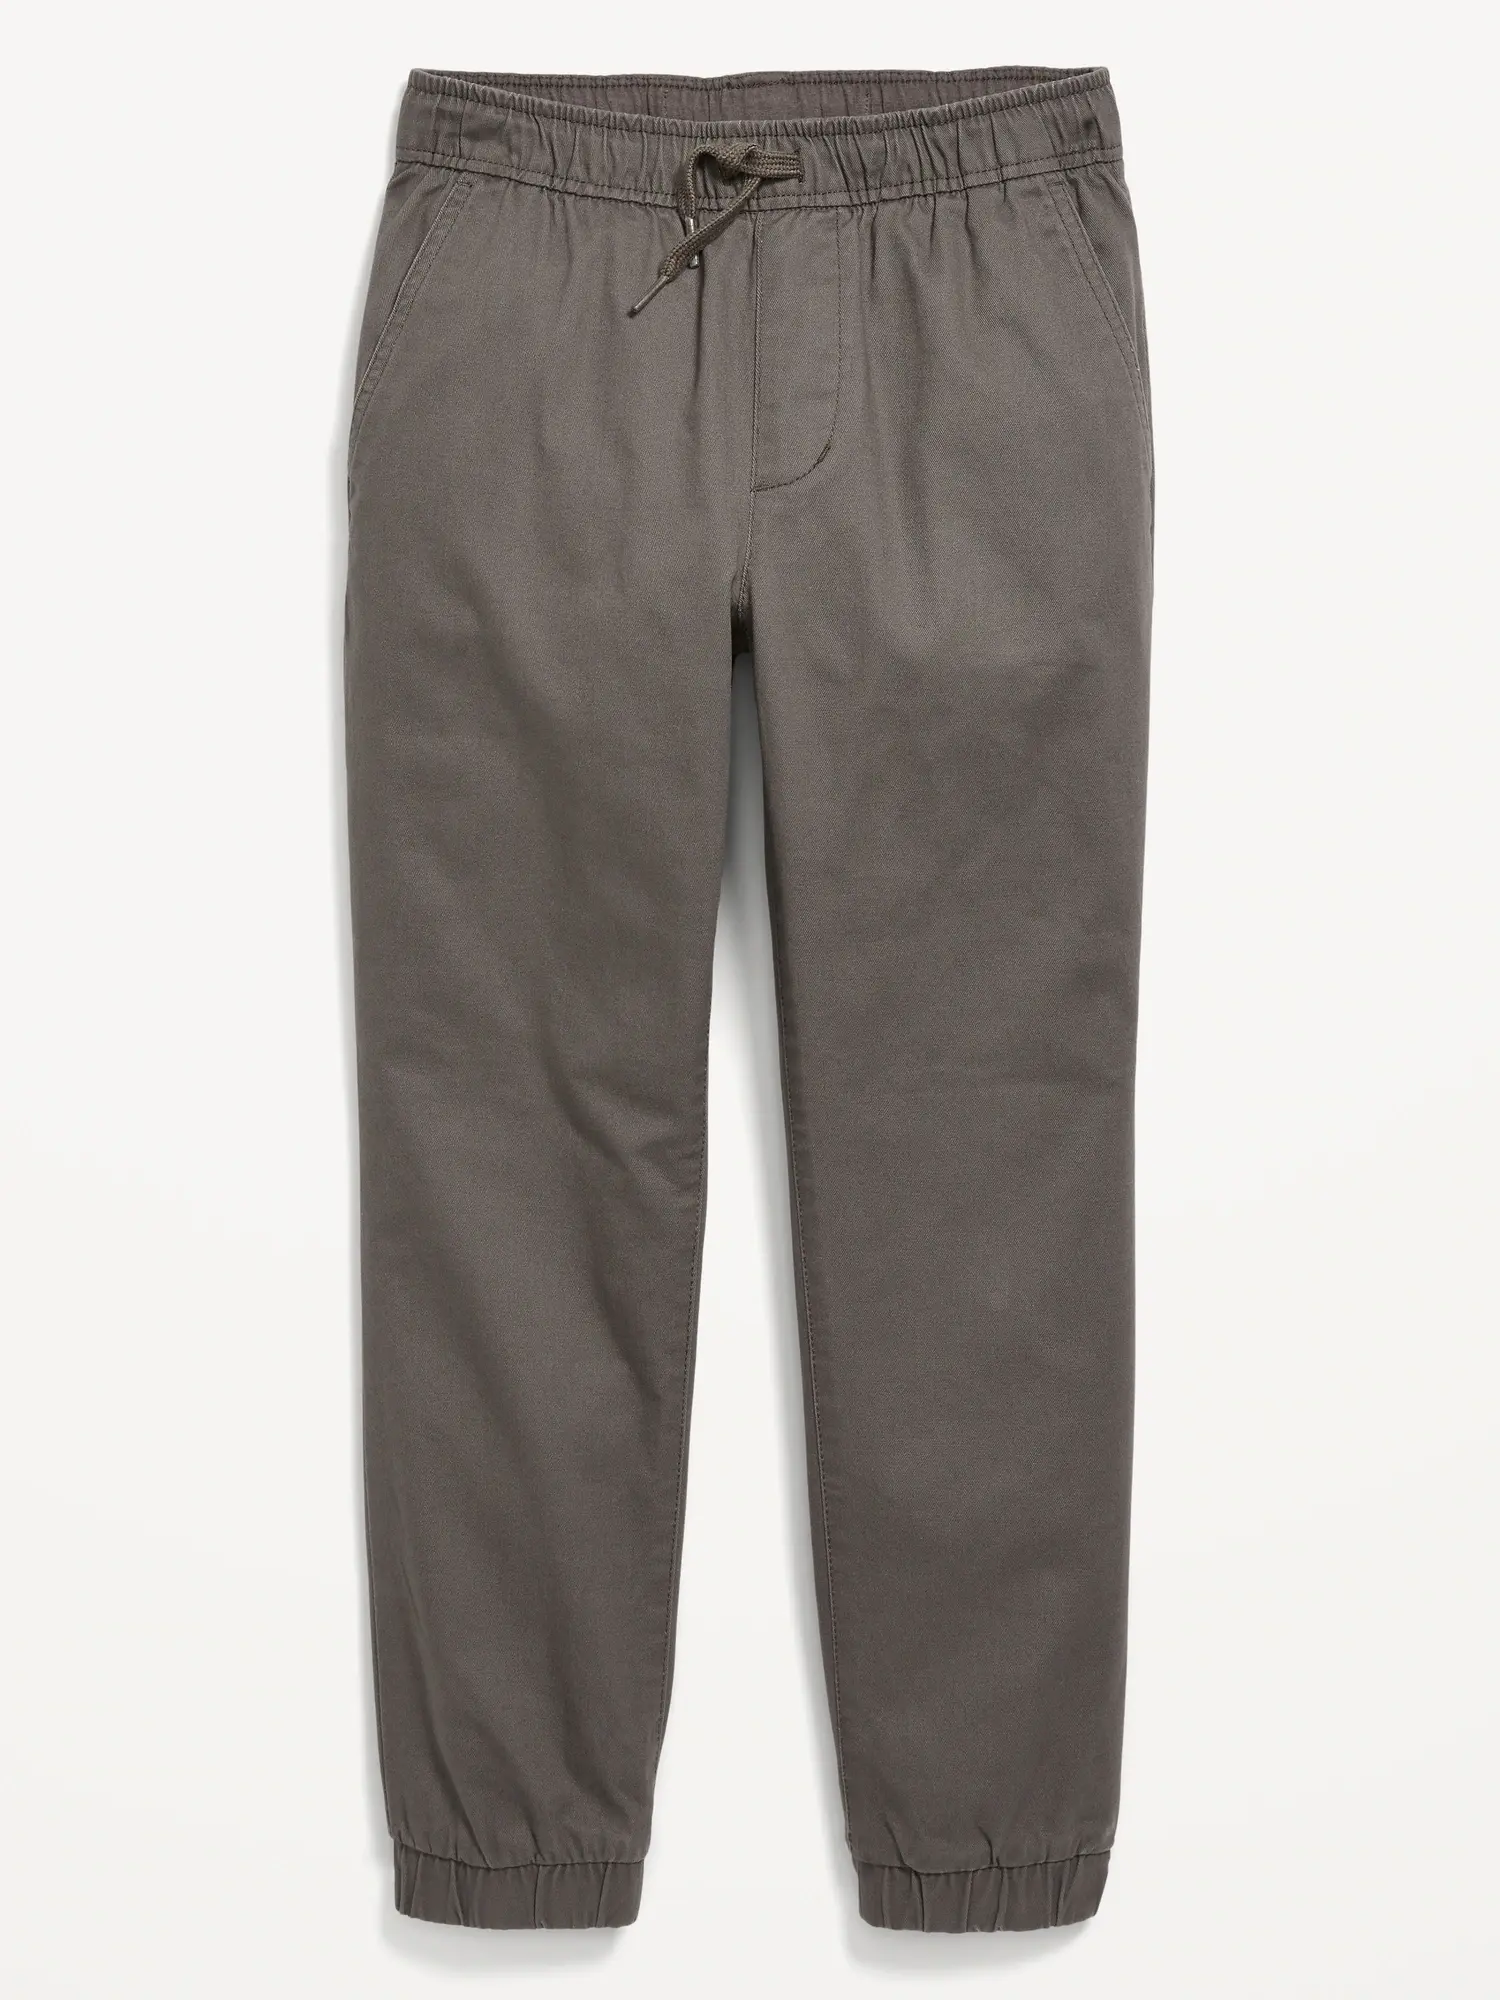 Old Navy Built-In Flex Twill Jogger Pants for Boys gray. 1